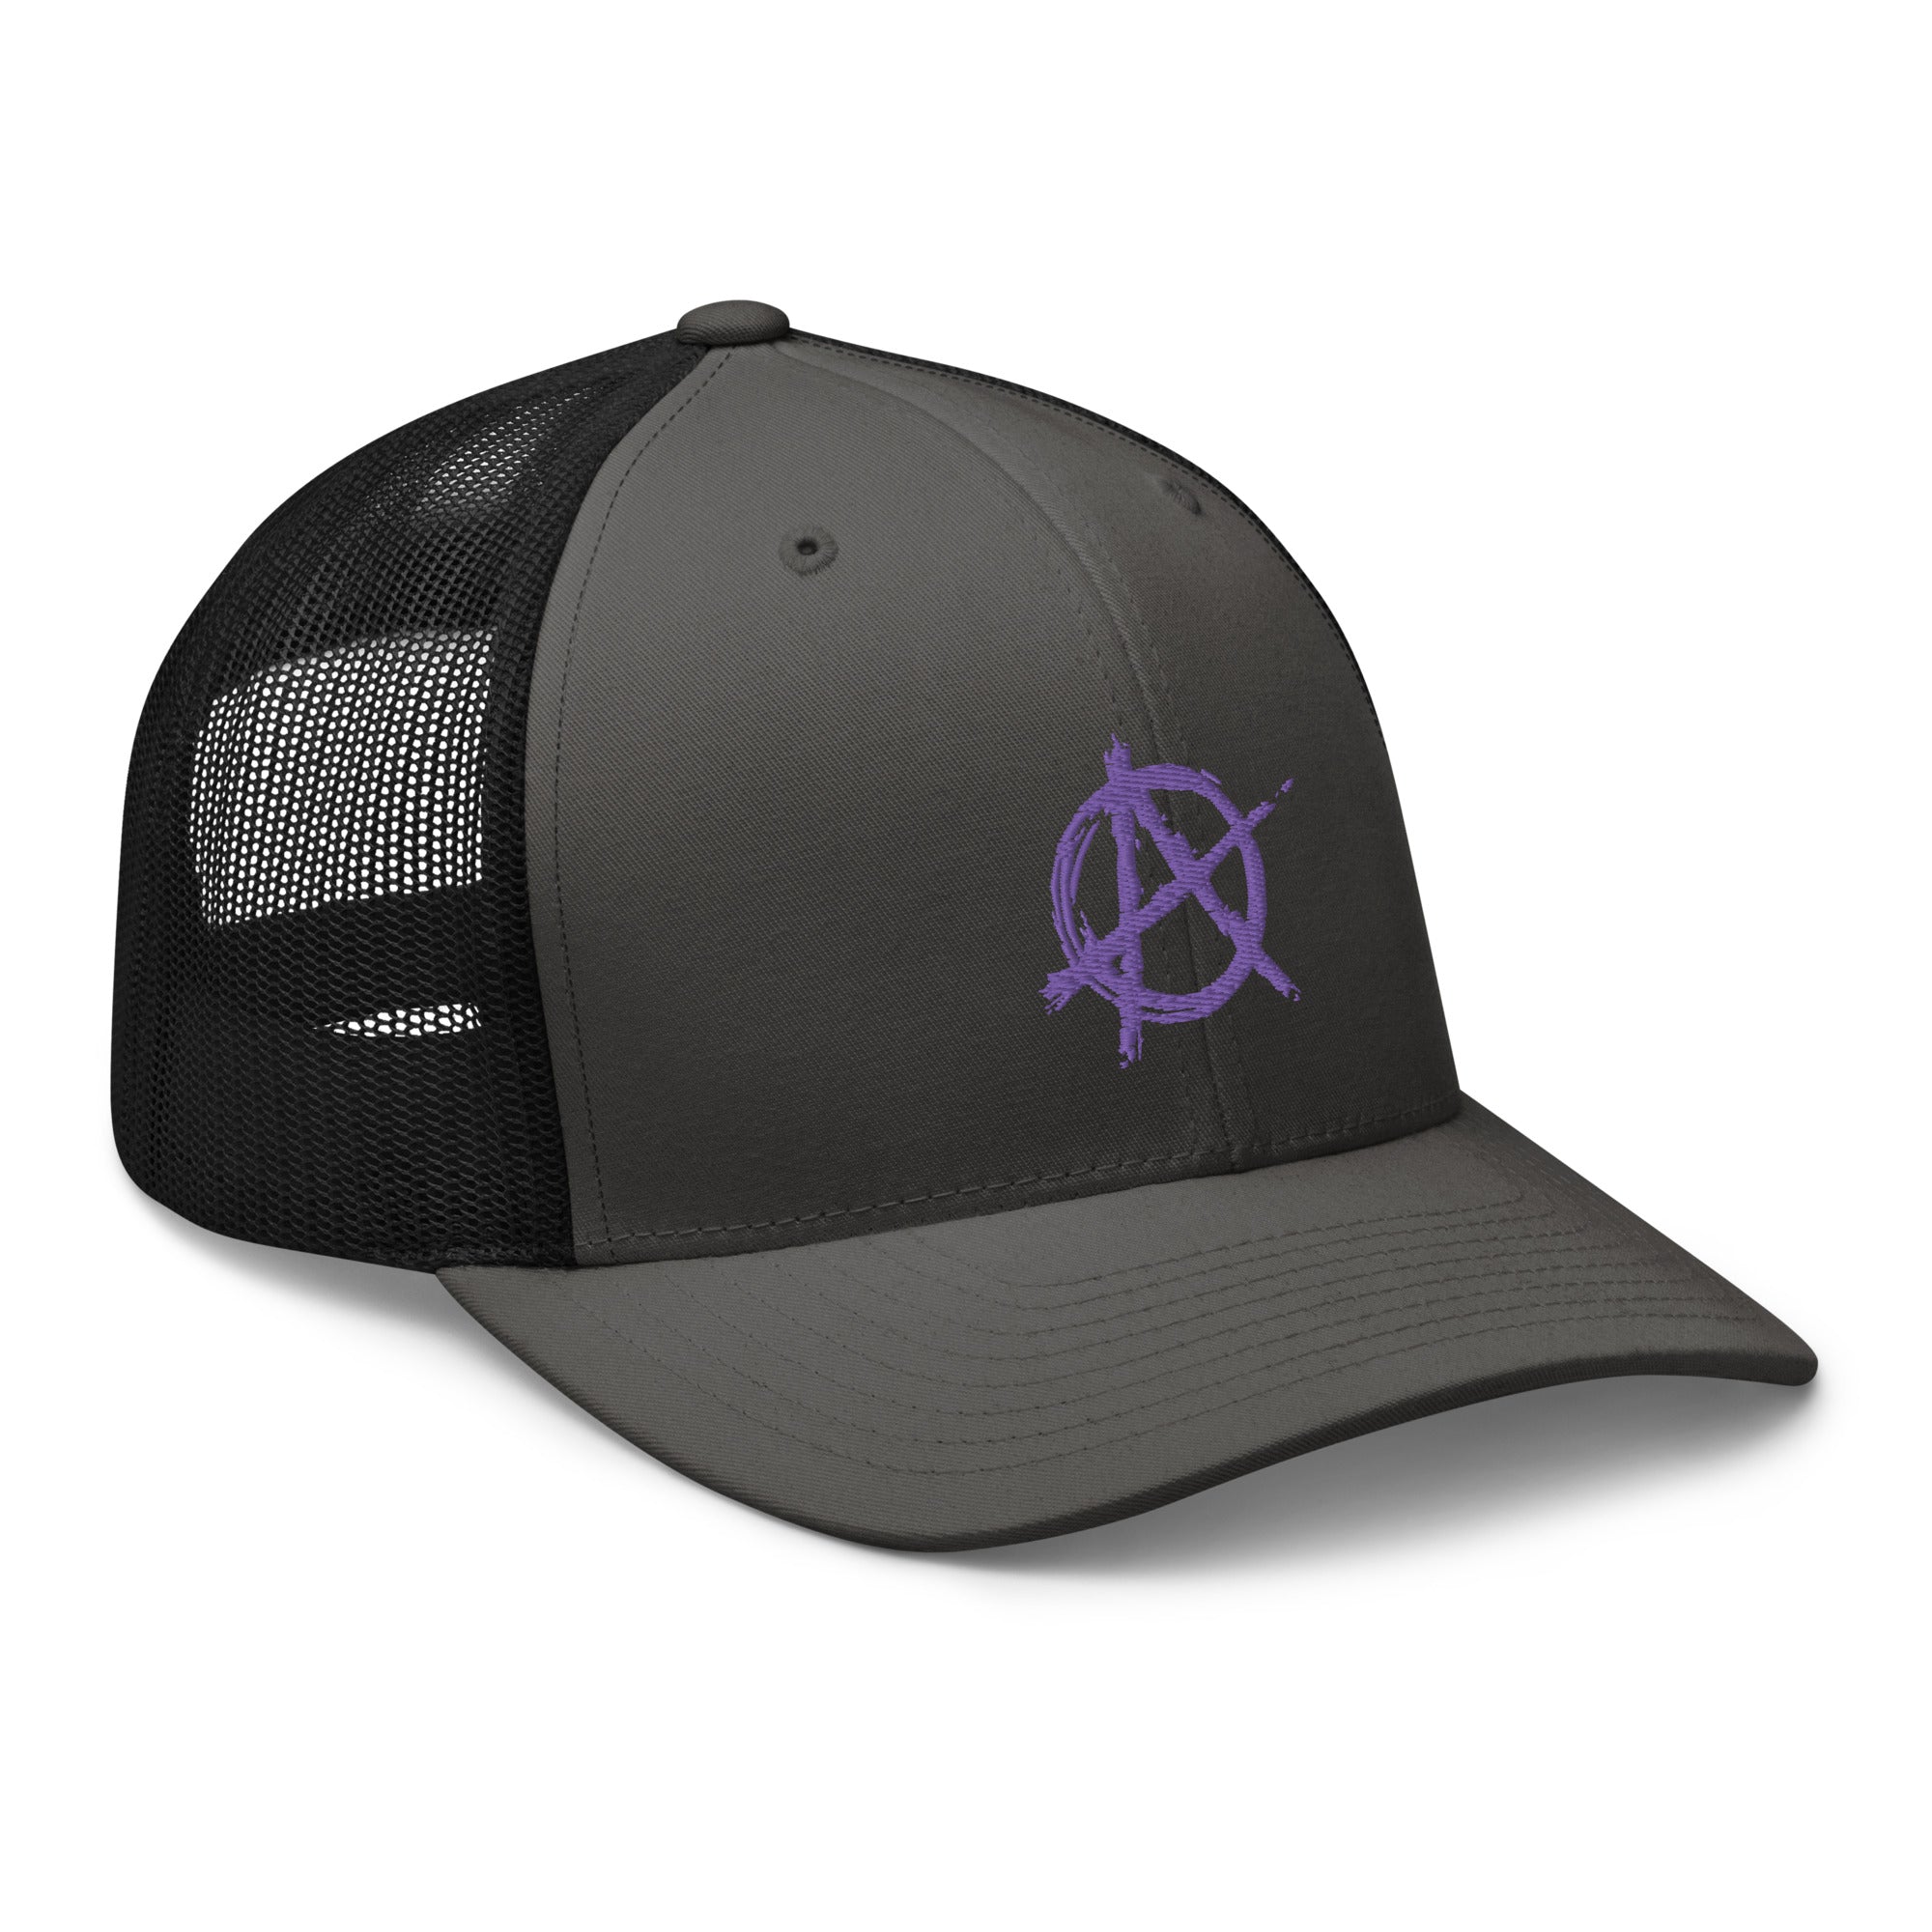 Purple Anarchy Sign Punk Rock Chaos Embroidered Retro Trucker Cap Snapback Hat